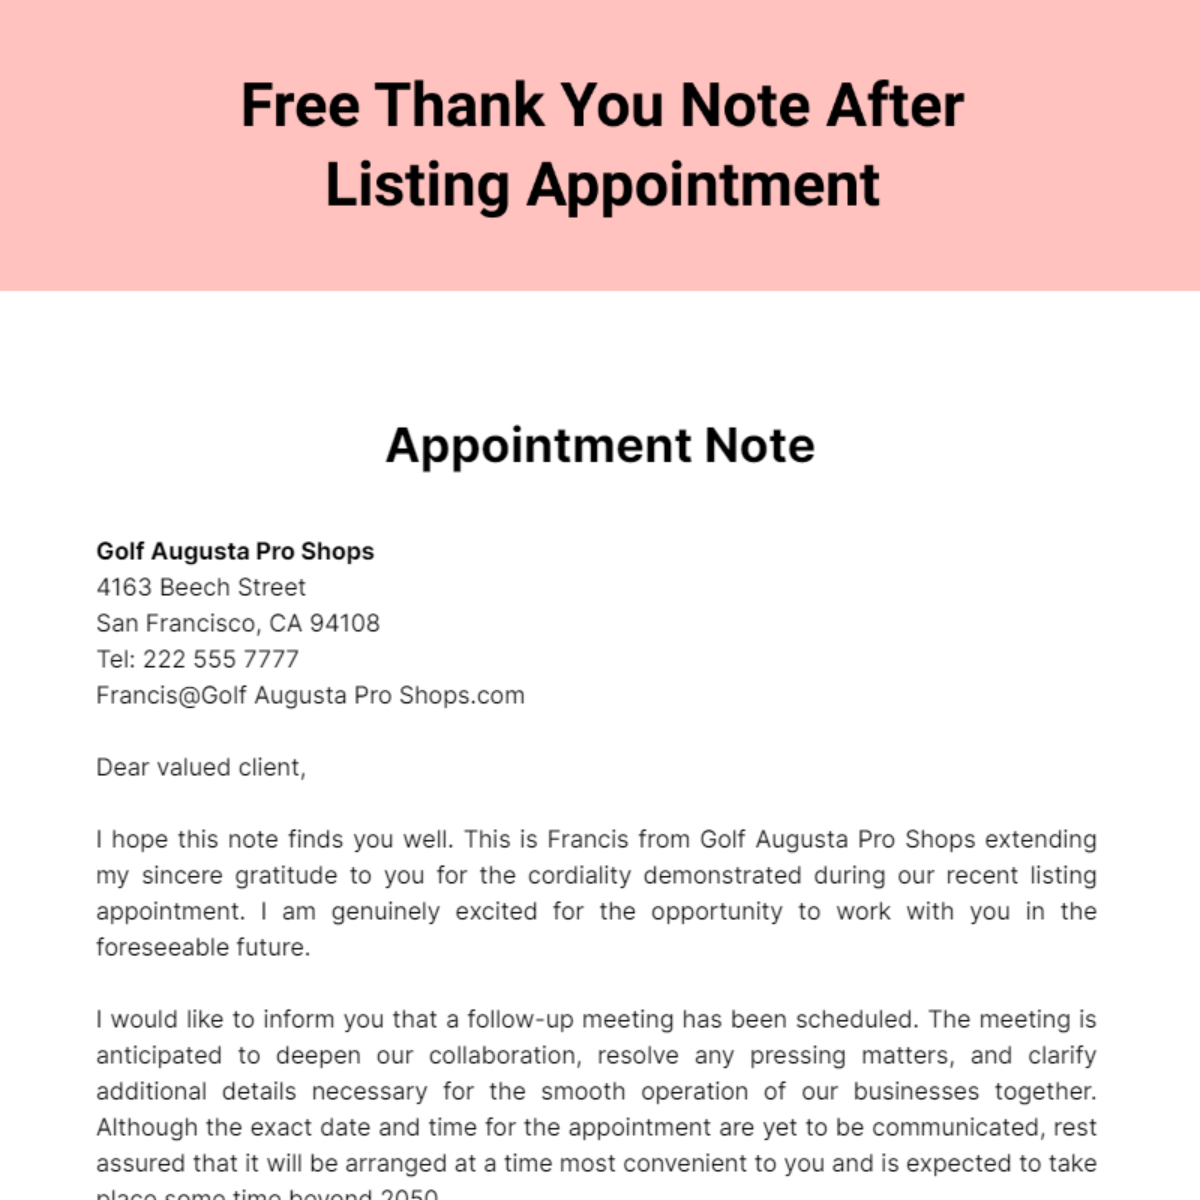 Thank you Note After Listing Appointment Template